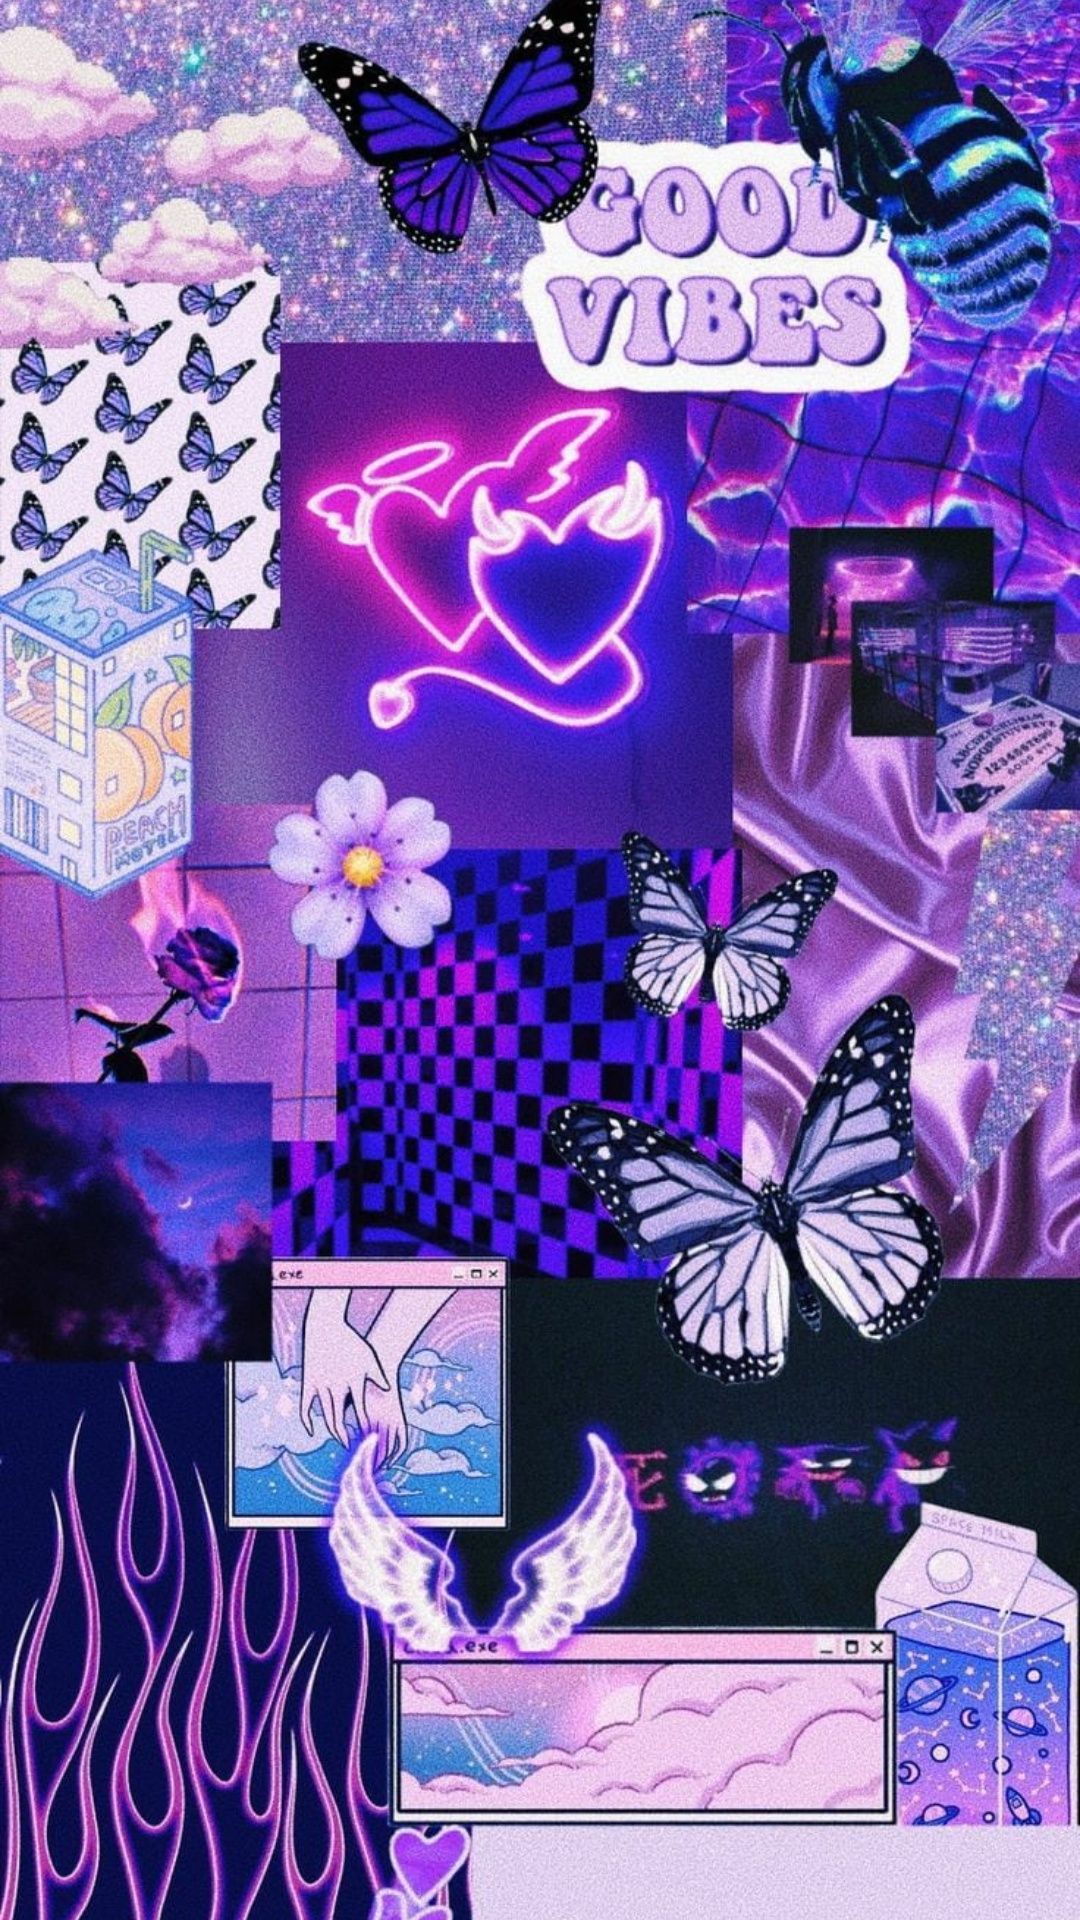 Aesthetic purple wallpaper for phone with butterfly, heart, and wings - Cool